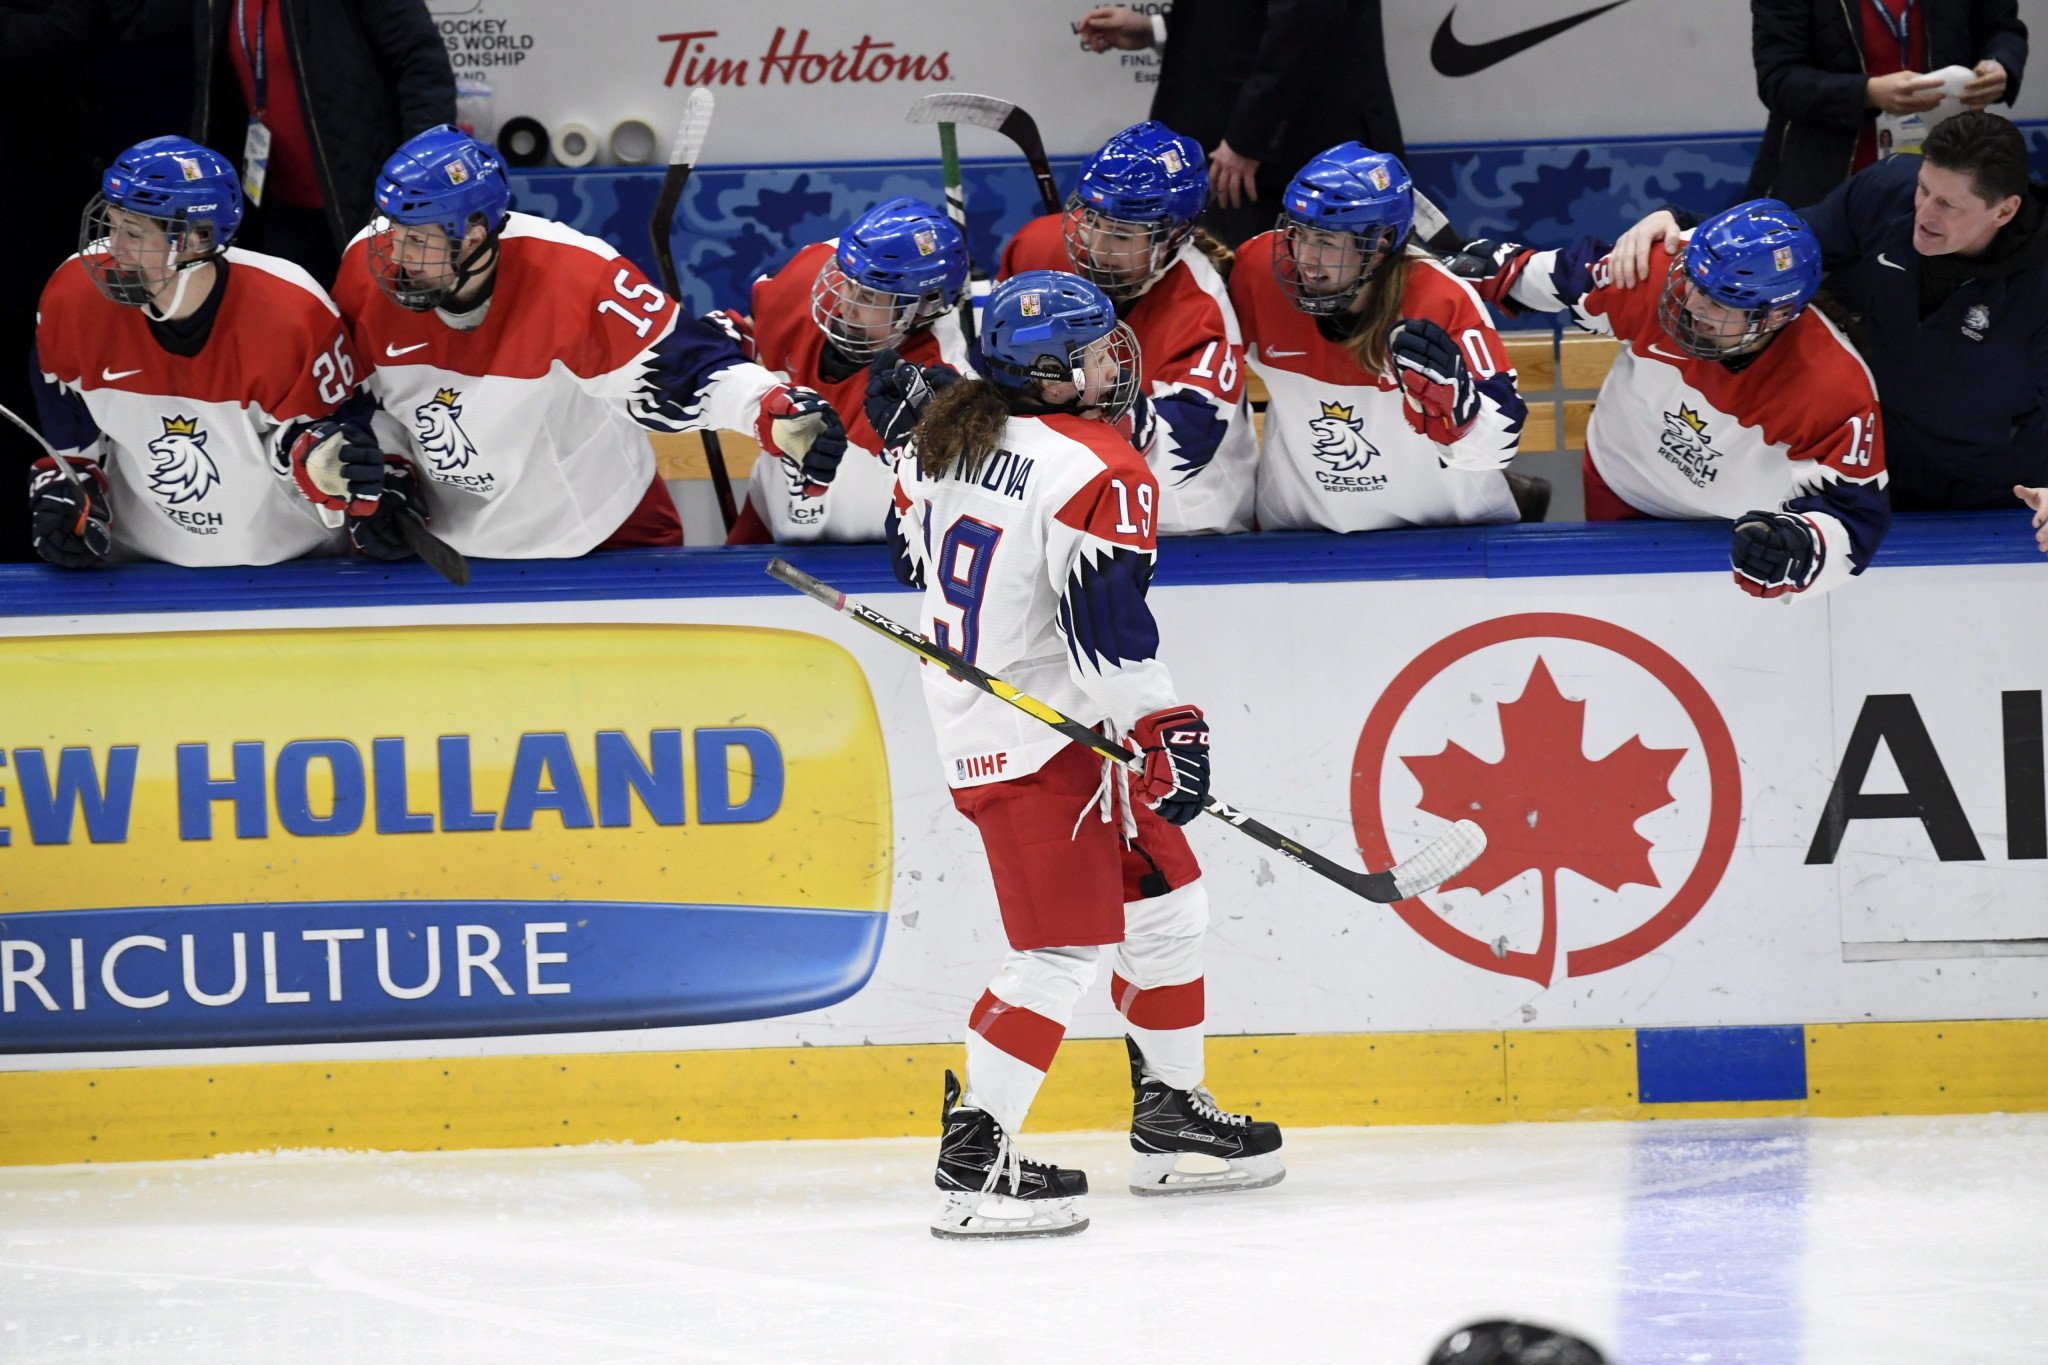 The Czech Republic are set to compete in Group B in Calgary ©Getty Images